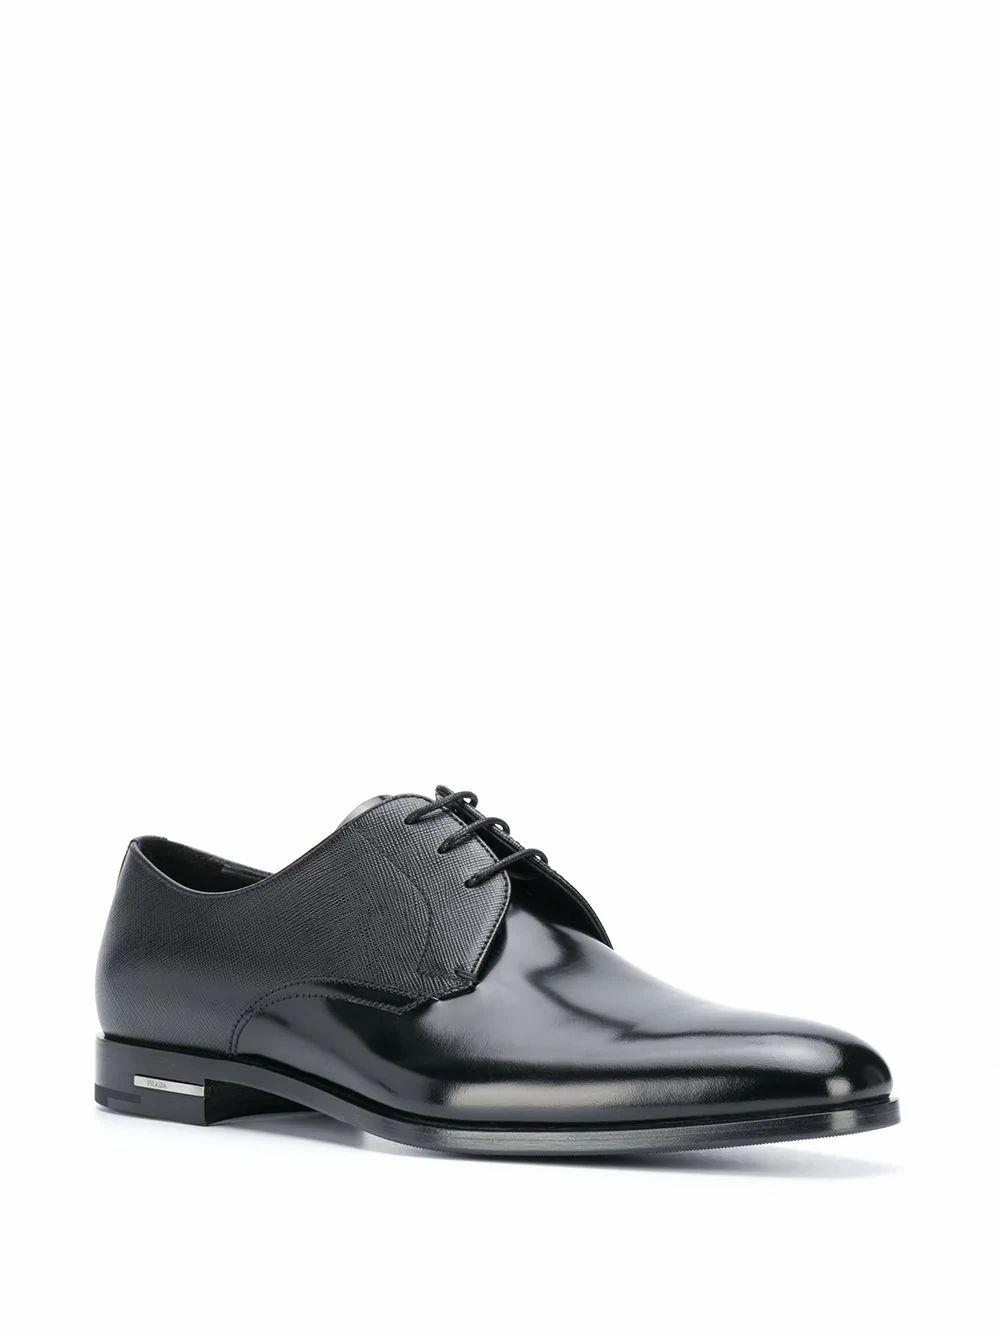 Prada Leather Lace-up Shoes in Black for Men - Save 27% - Lyst